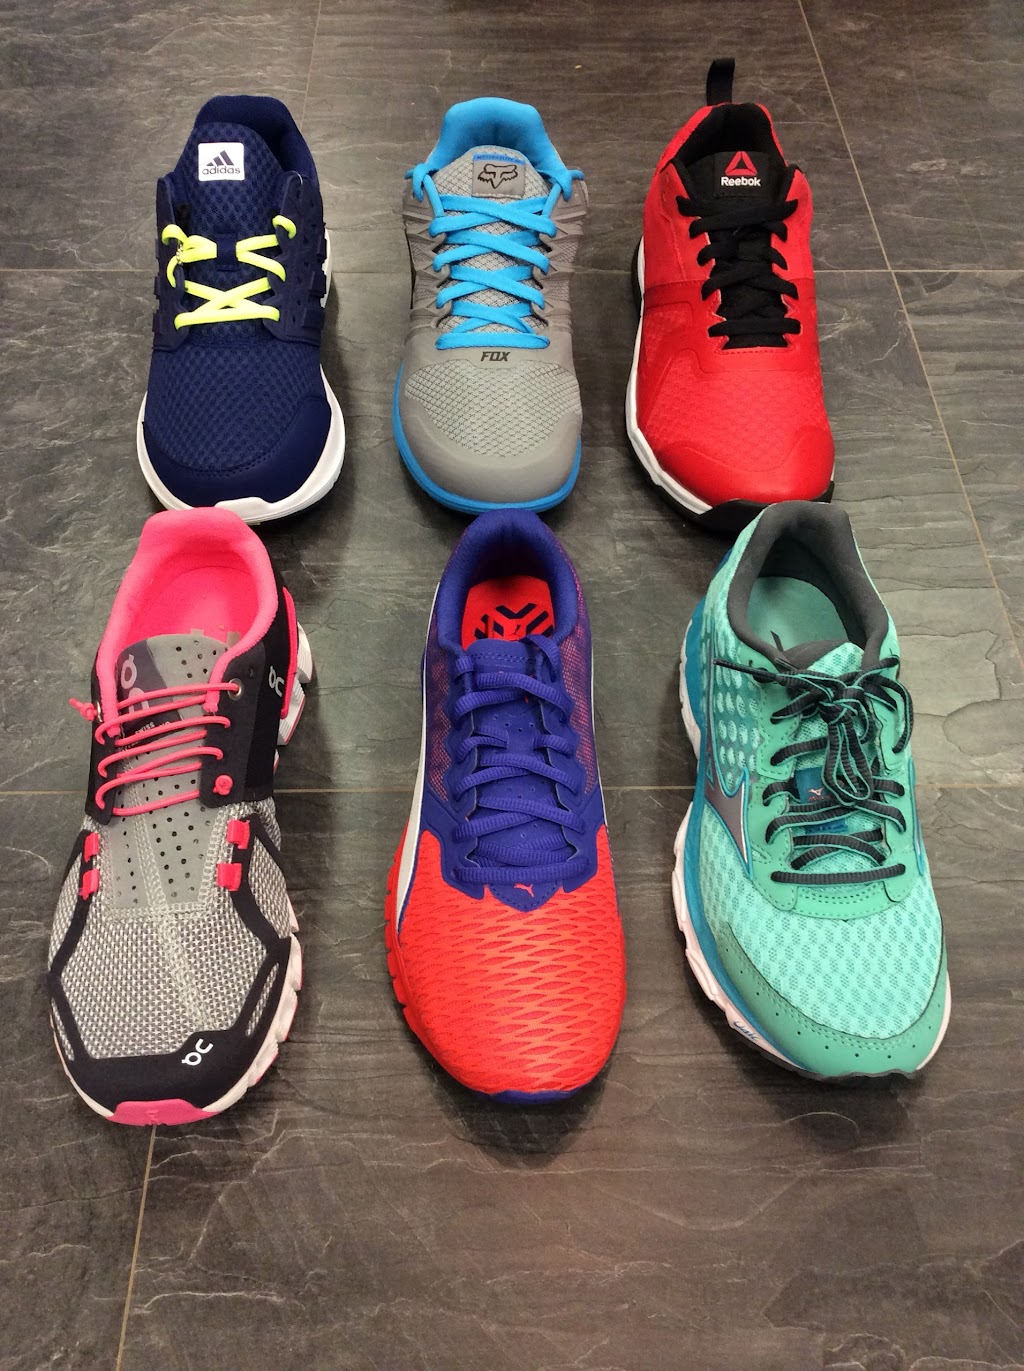 Sneakers Plus | 6600 50 Ave #6, Stettler, AB T0C 2L2, Canada | Phone: (403) 742-0258